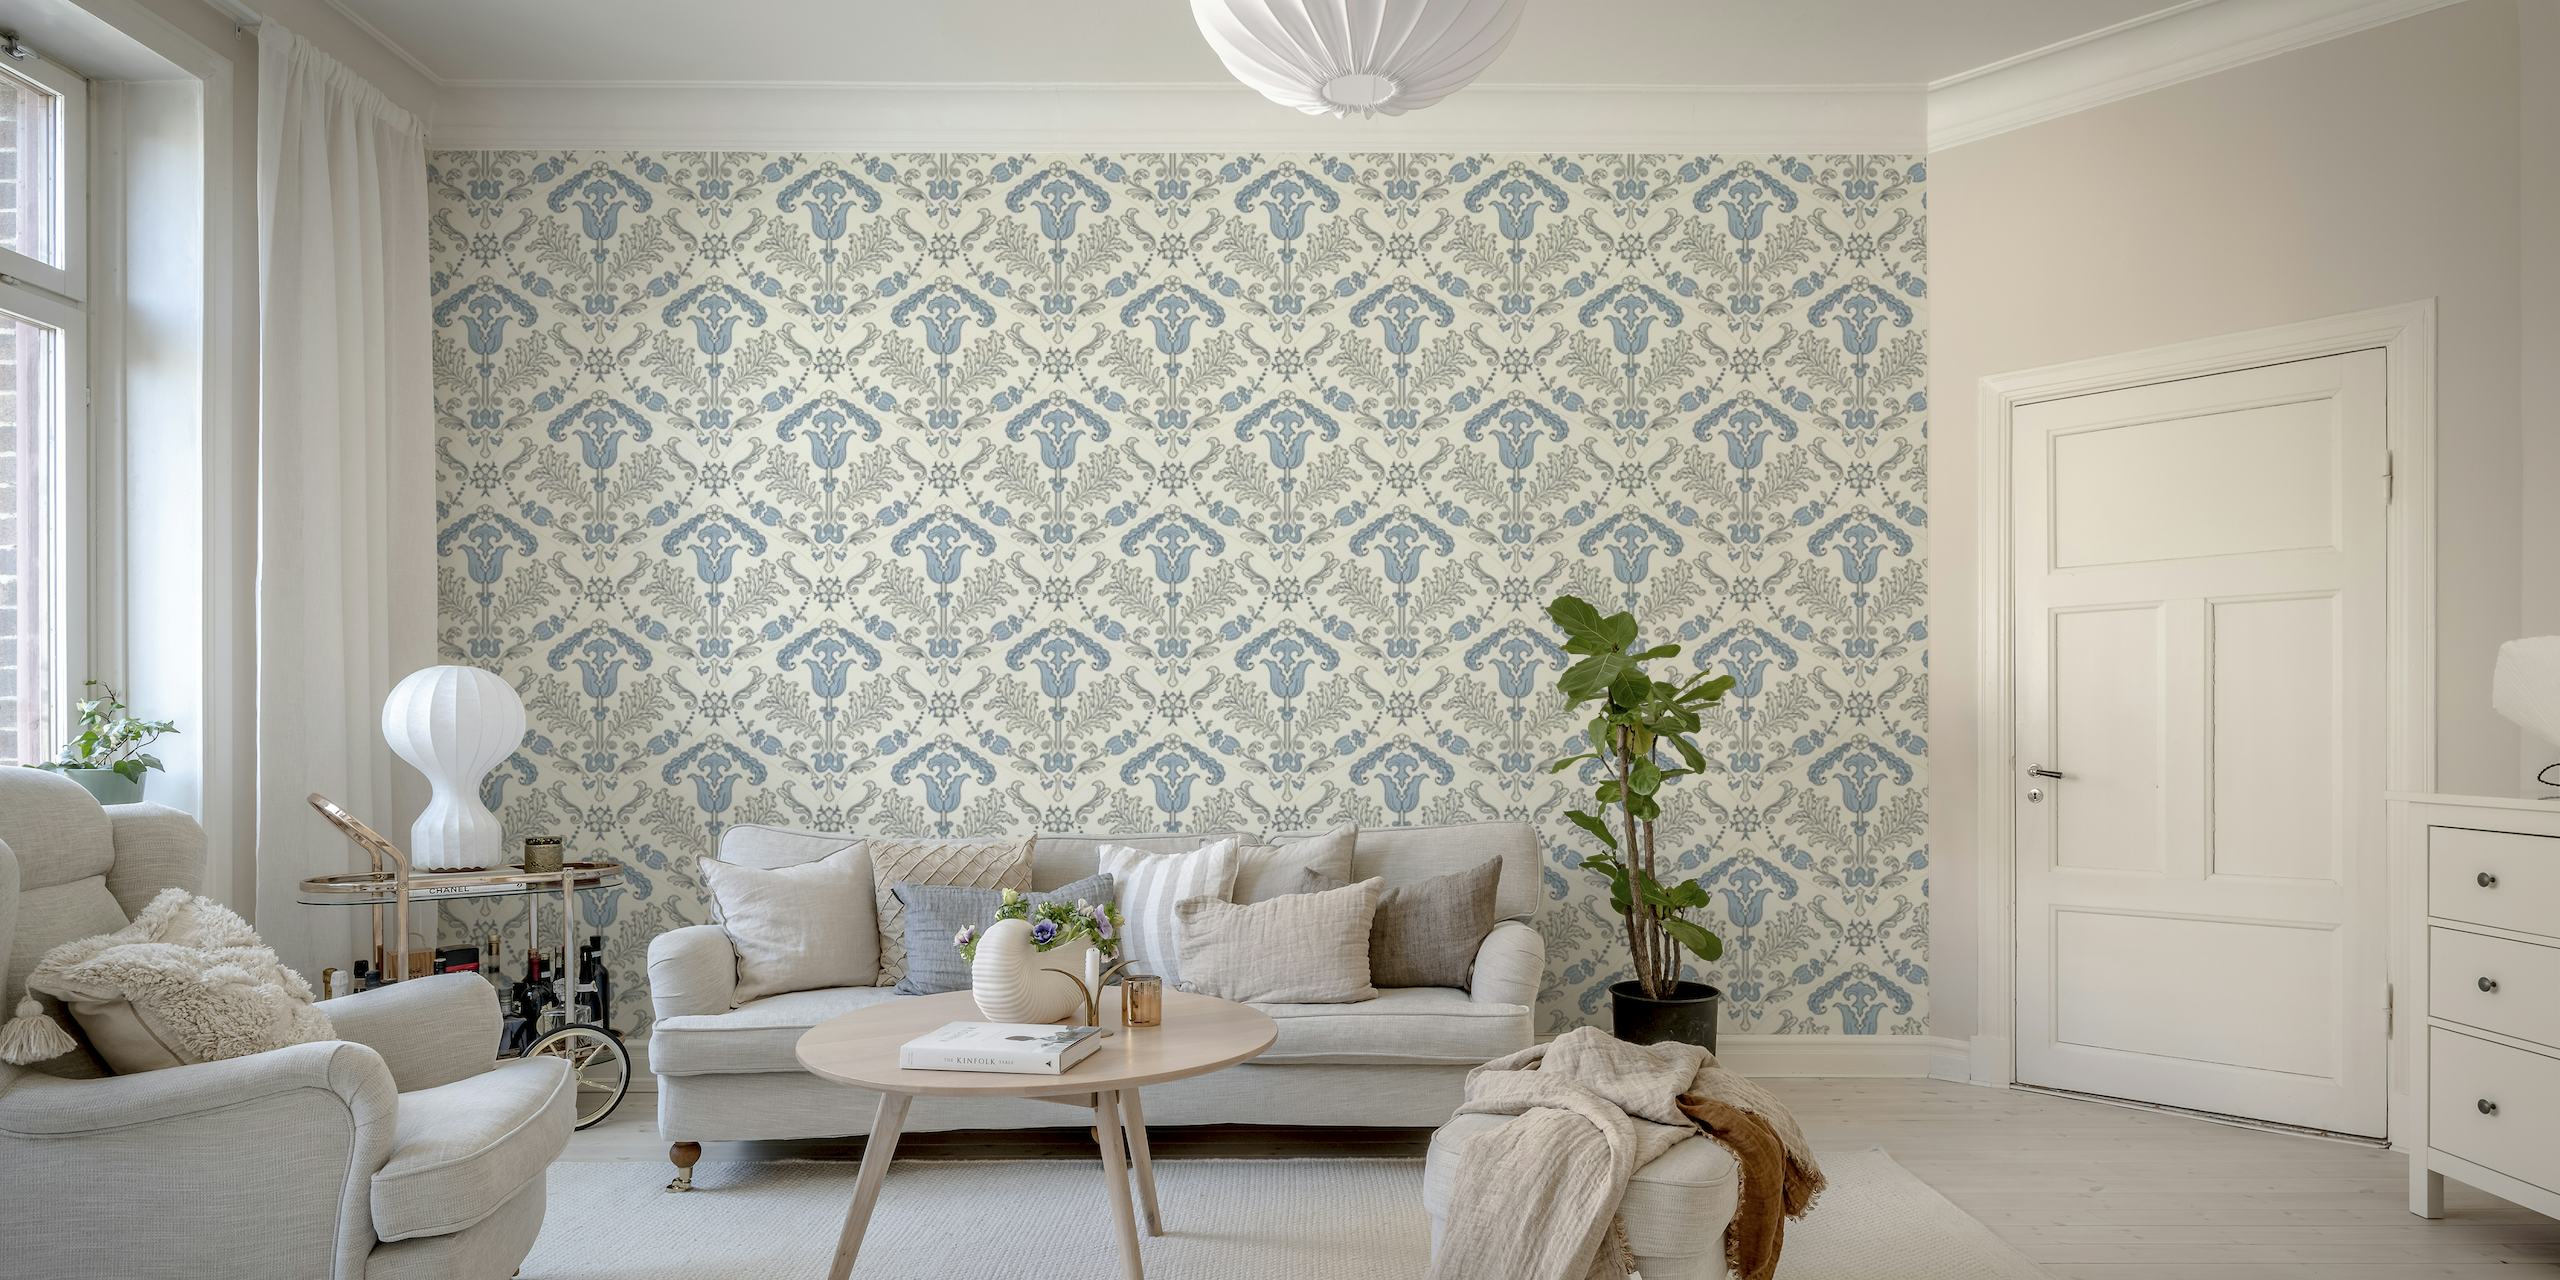 Light blue stylized tulips pattern wall mural for home decor.